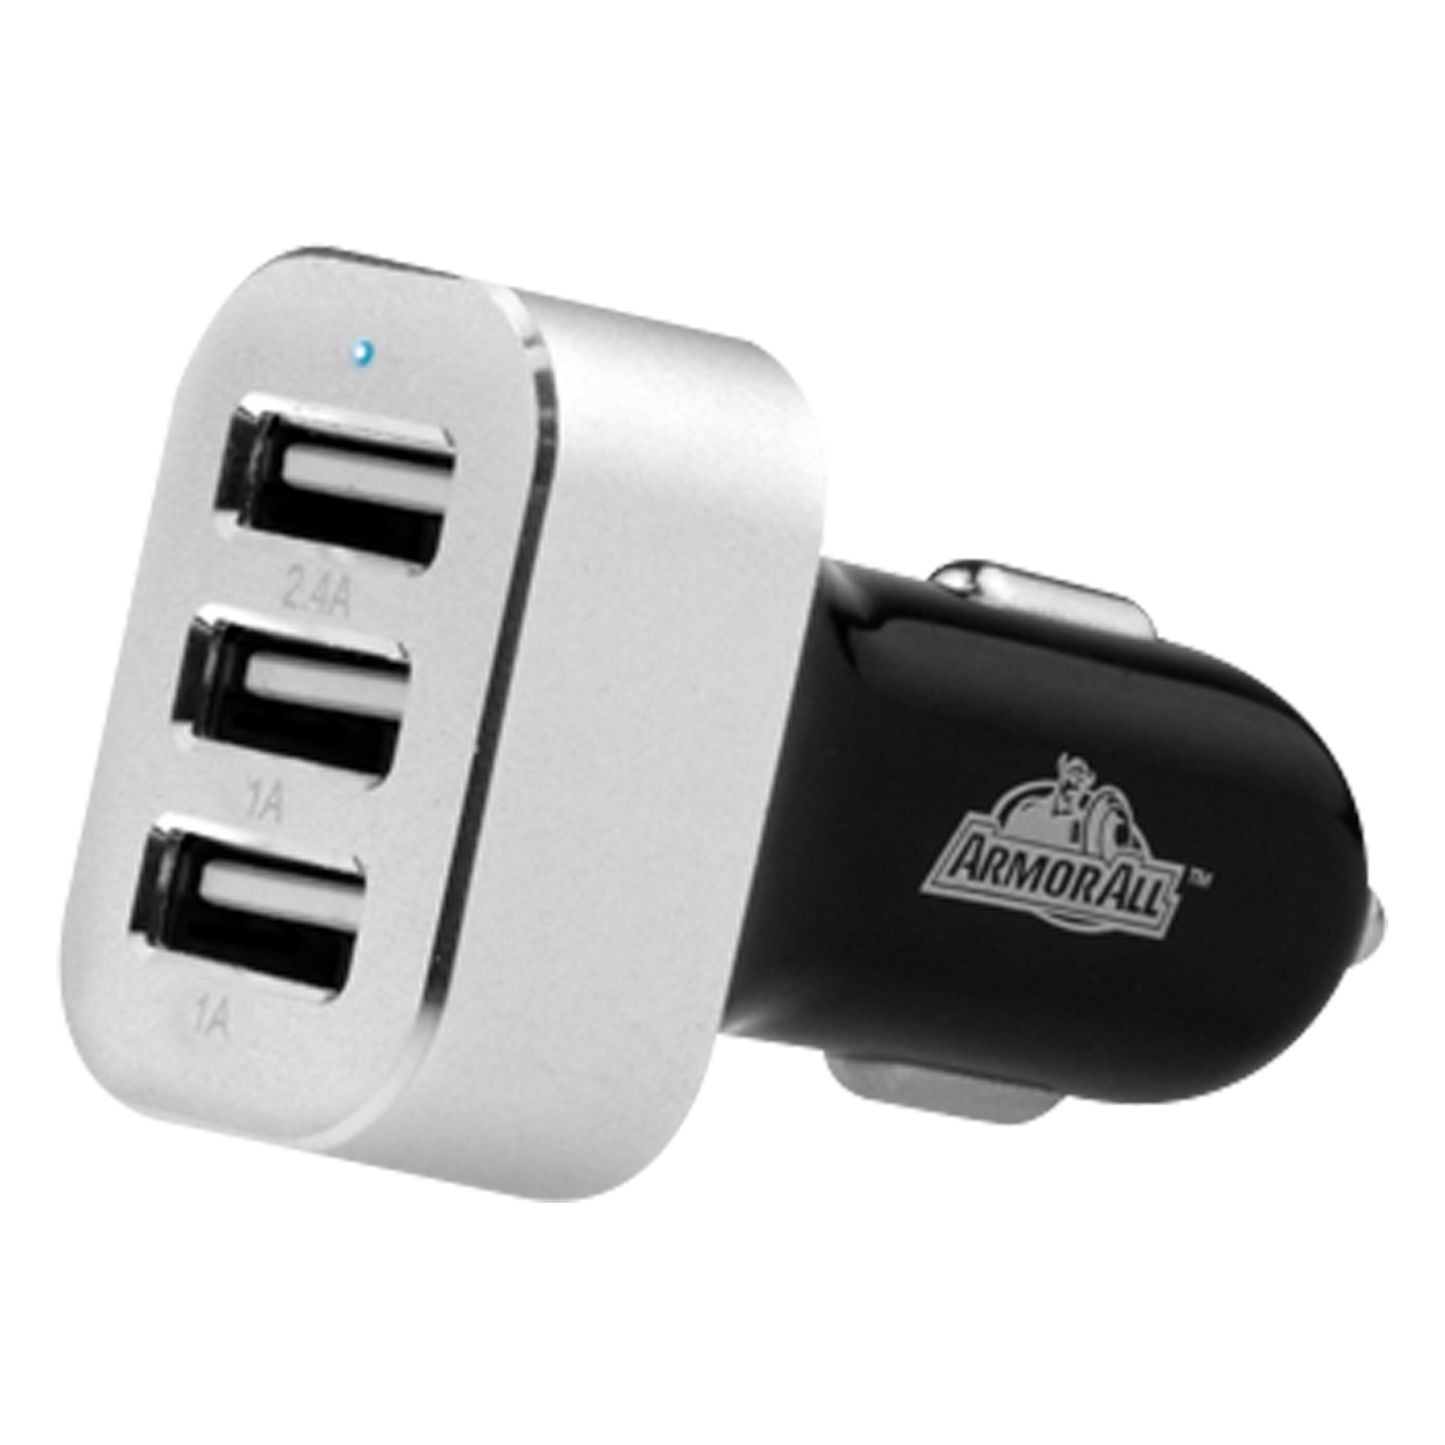 Armor All 4.4amp 3-Ports Car Charger ACC8-1002